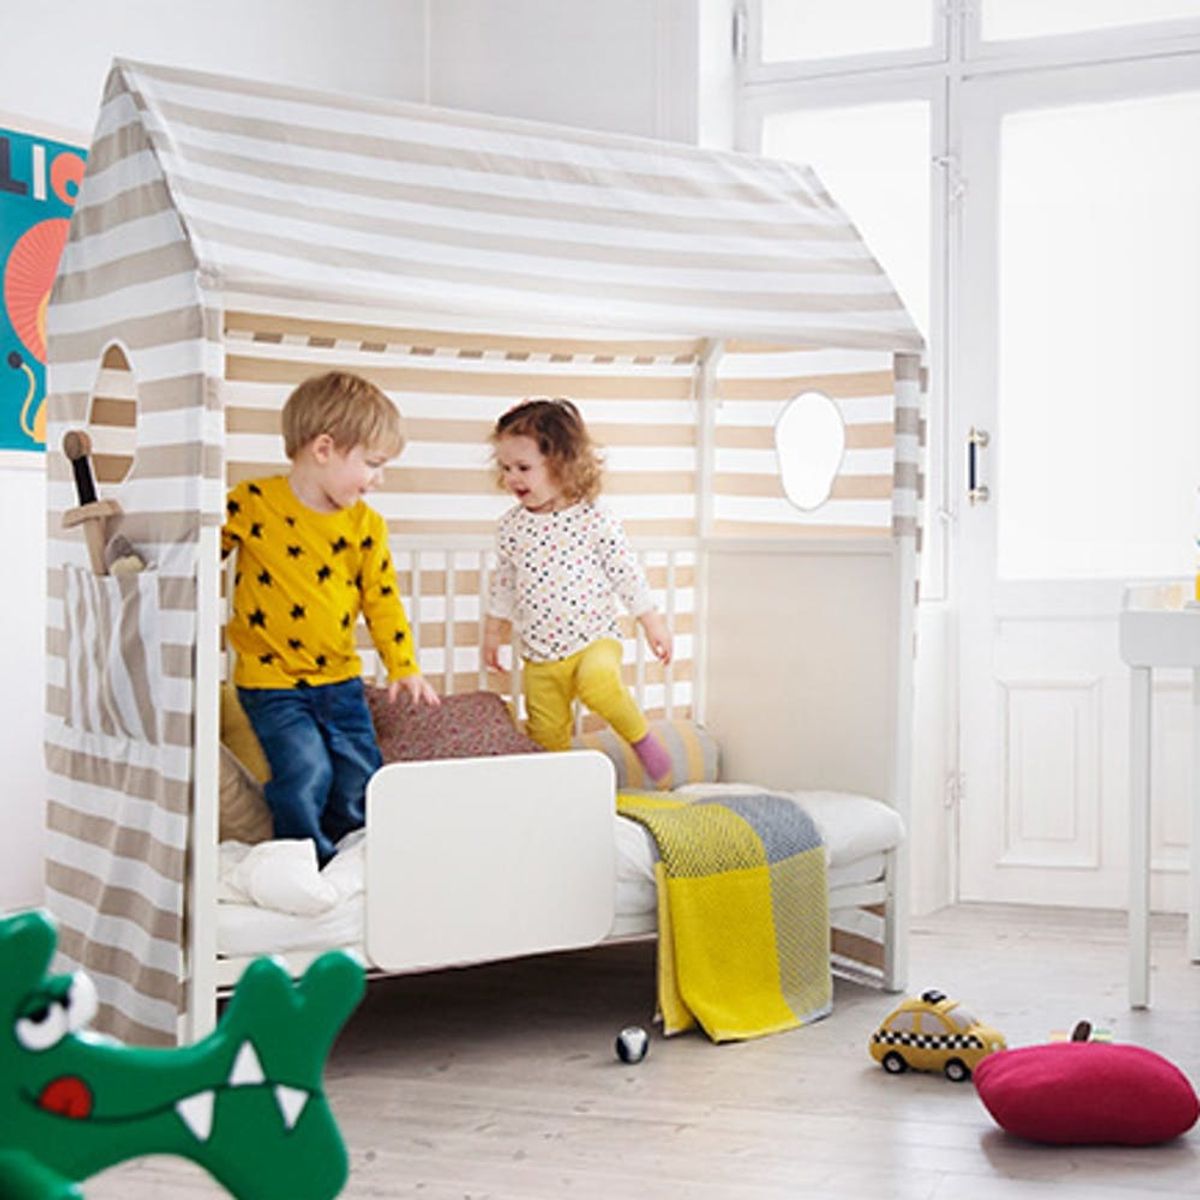 This Cool Crib Is like a Dollhouse